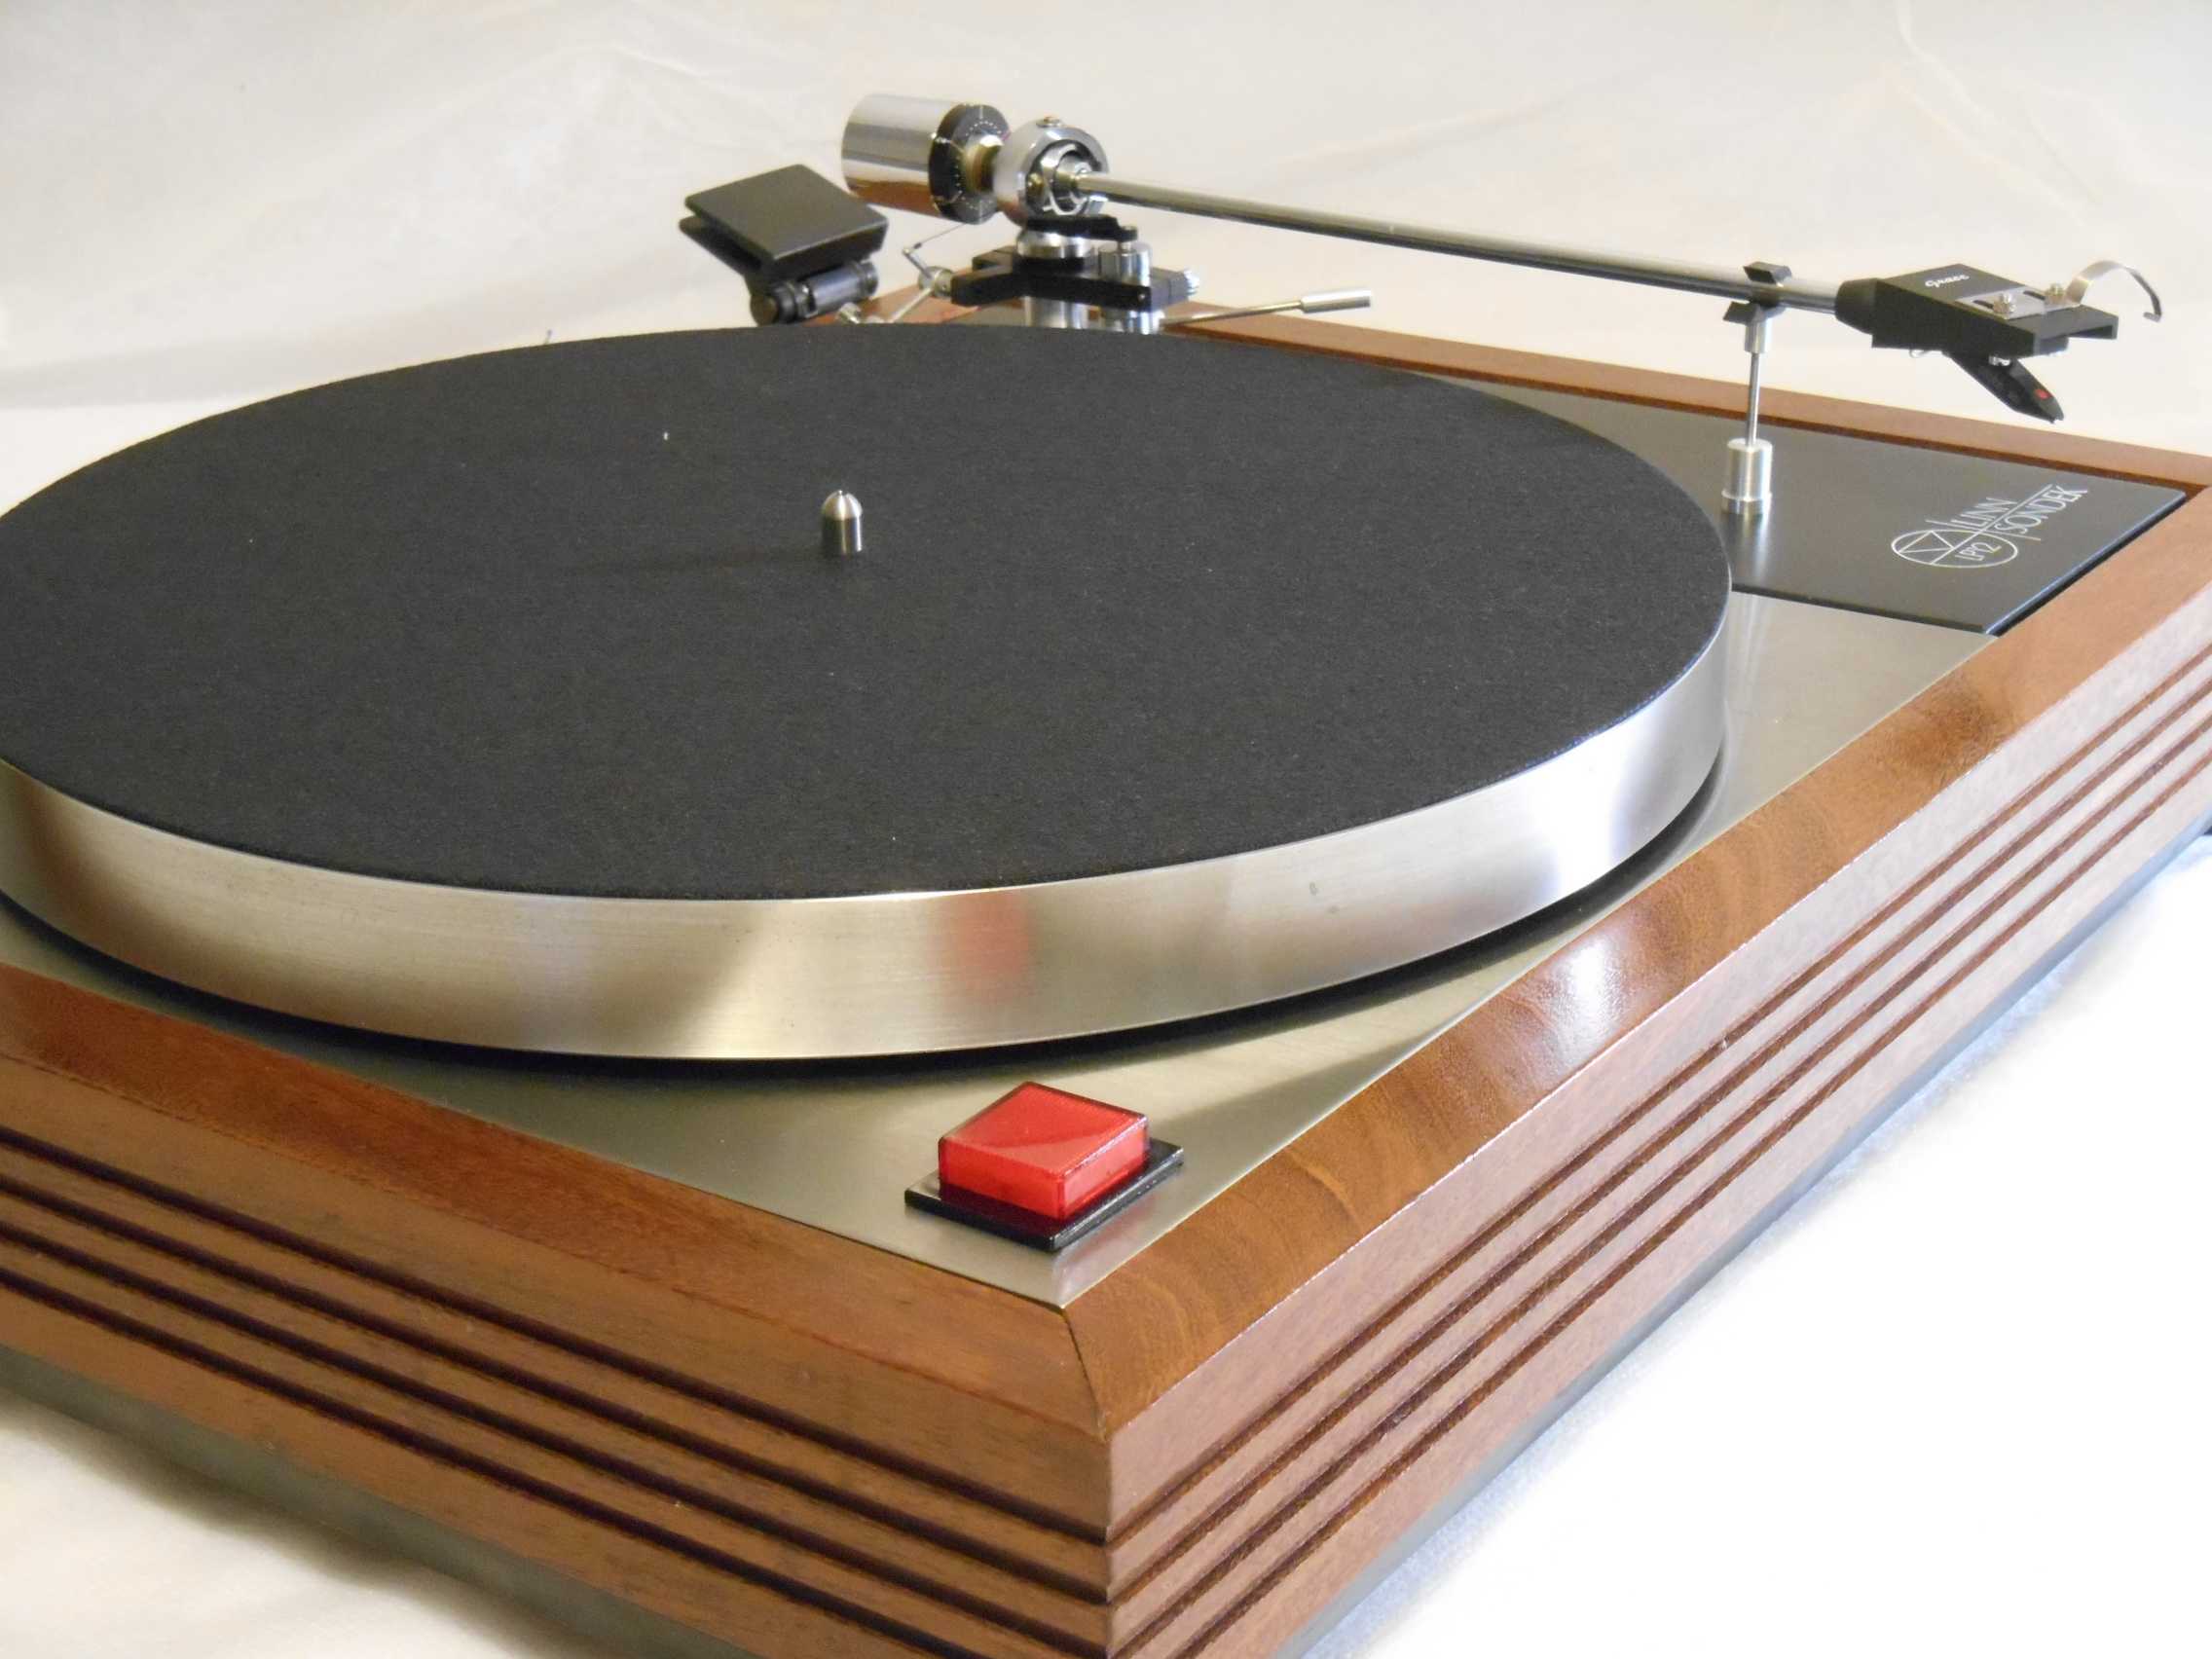 Thorens td 1601 review – blast from the past